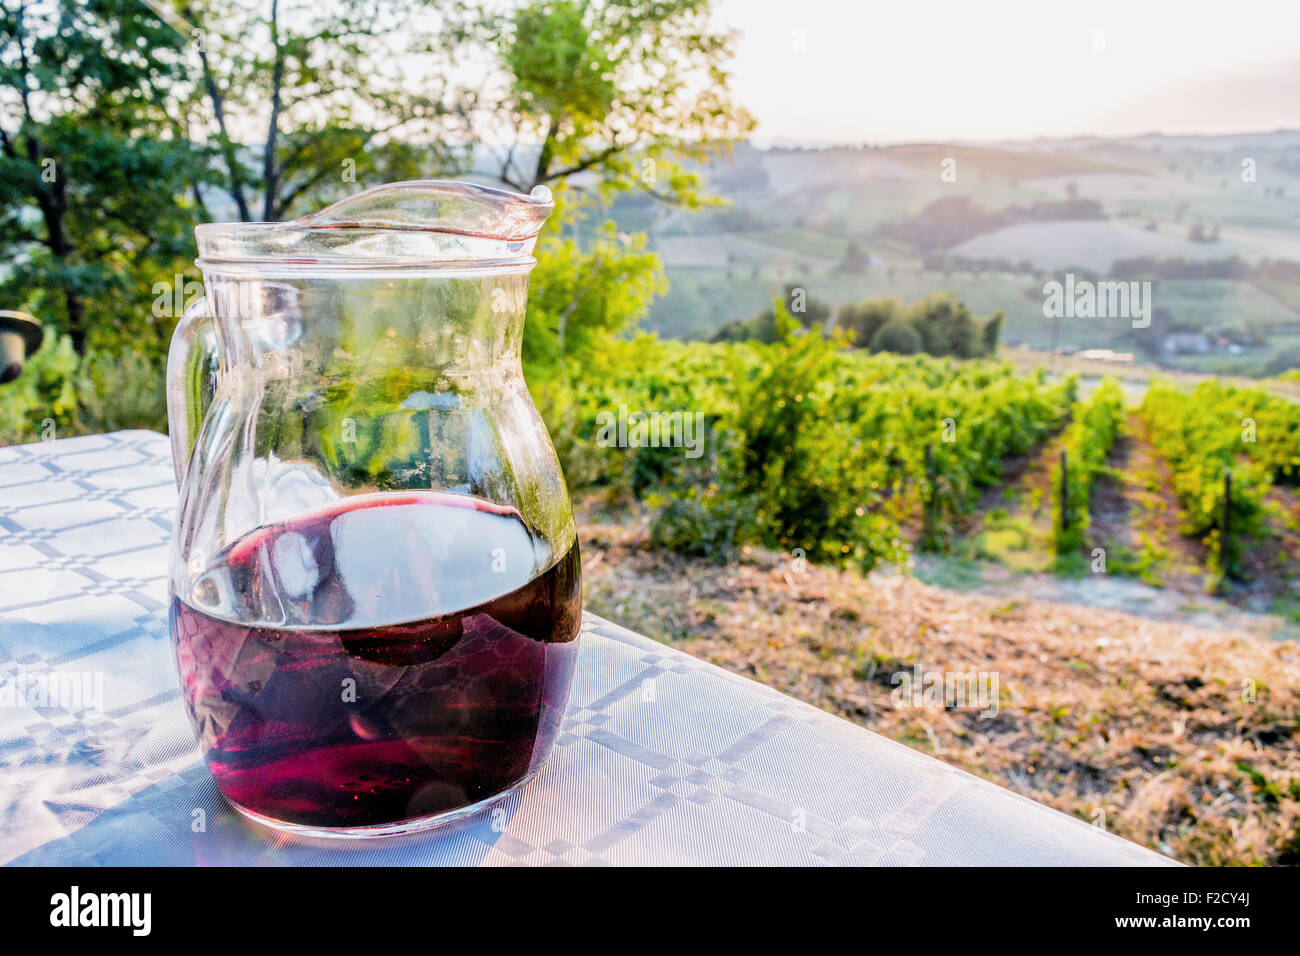 jug of genuine and non-industrial wine on a table with vineyards, farmlands and green vegetation of the countryside in the background Stock Photo